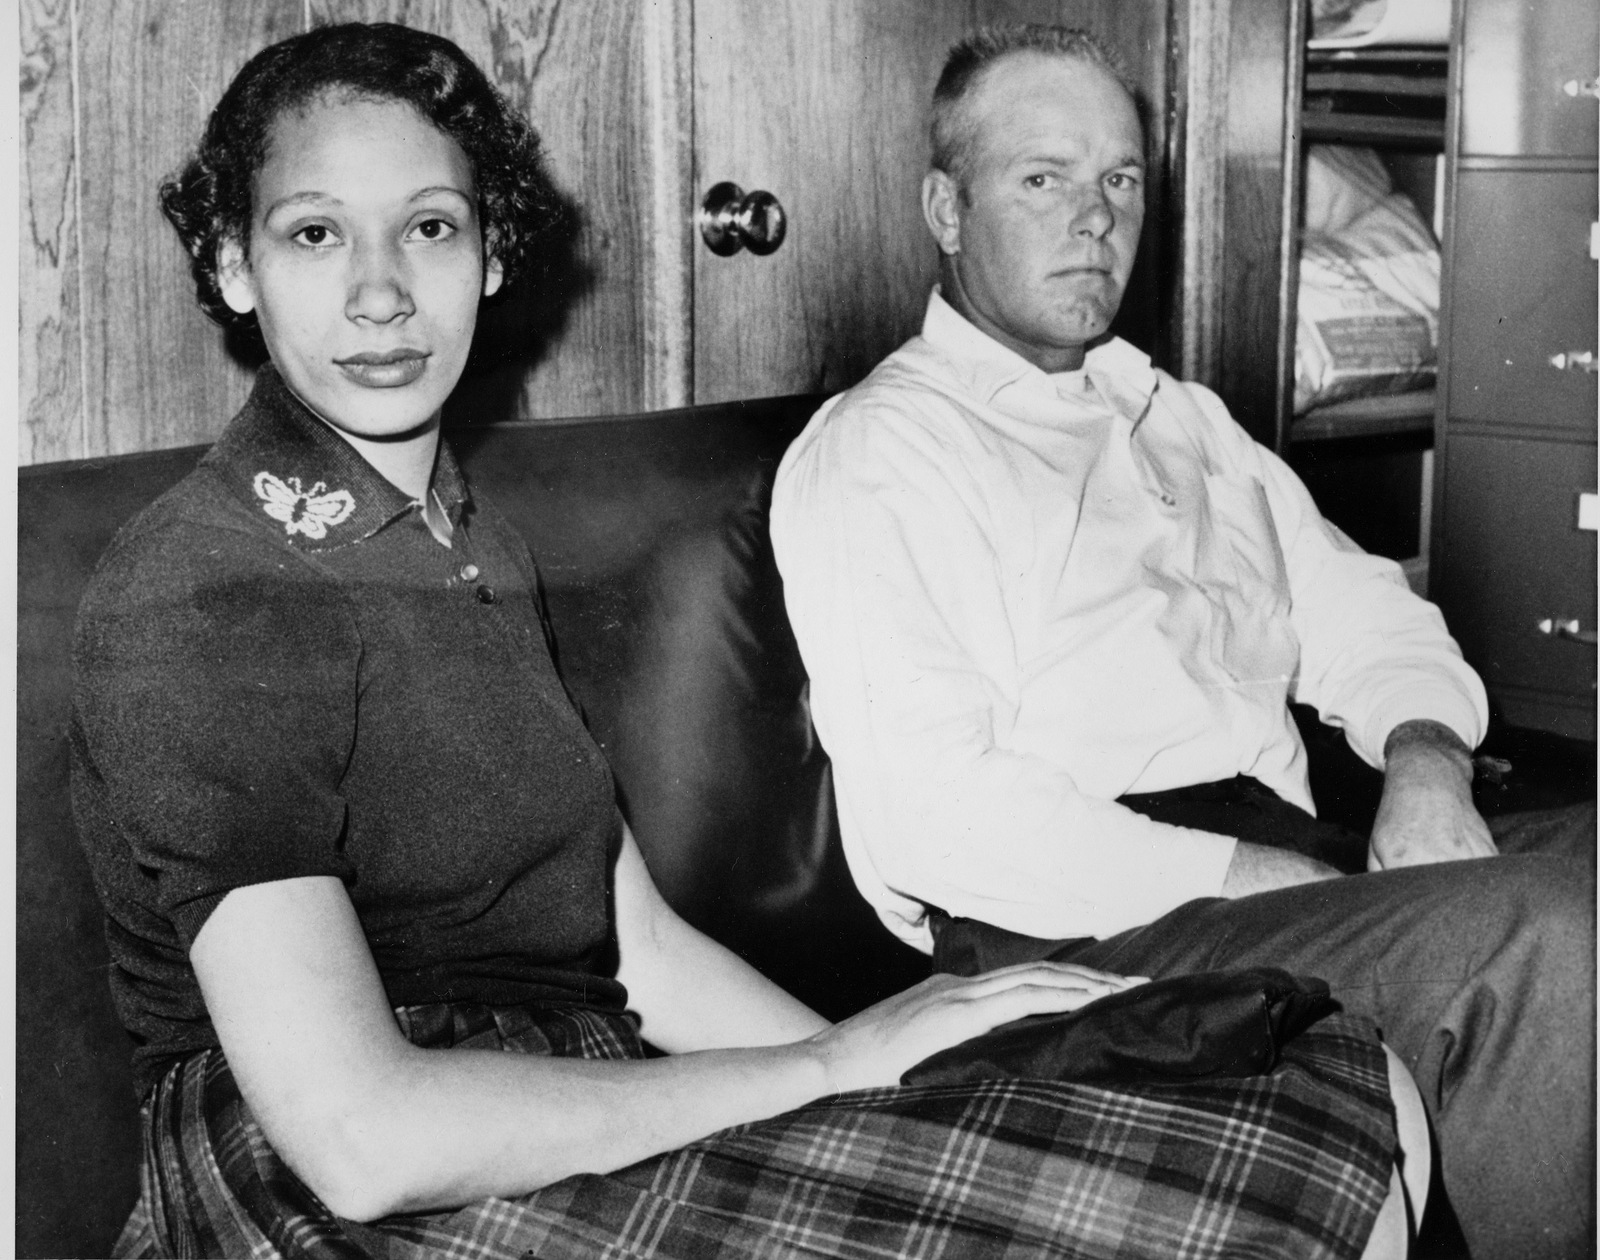 Richard P. Loving and his wife, Mildred, pose in this Jan. 26, 1965, file photograph. Residents of Caroline County, Virginia,, the couple was convicted under the state's law that banned mixed marriages.  (AP Photo)